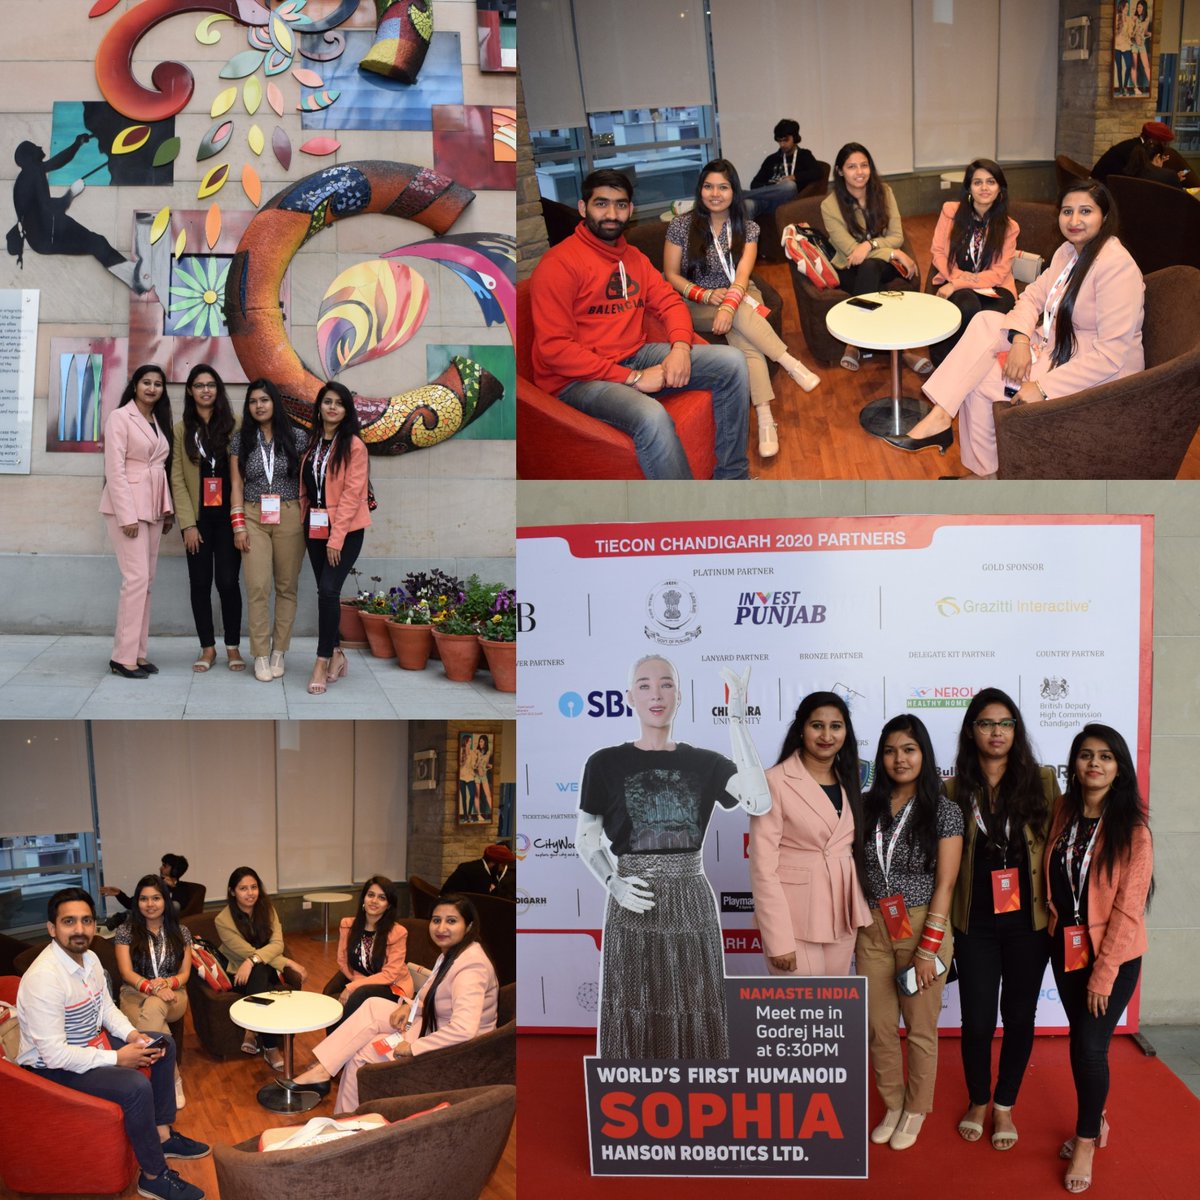 Sometimes spending your day off into something valuable is worth it!

#TiEConChandigarh2020 #entrepreneurs #digitalmarketers #signitysoftwaresolutions